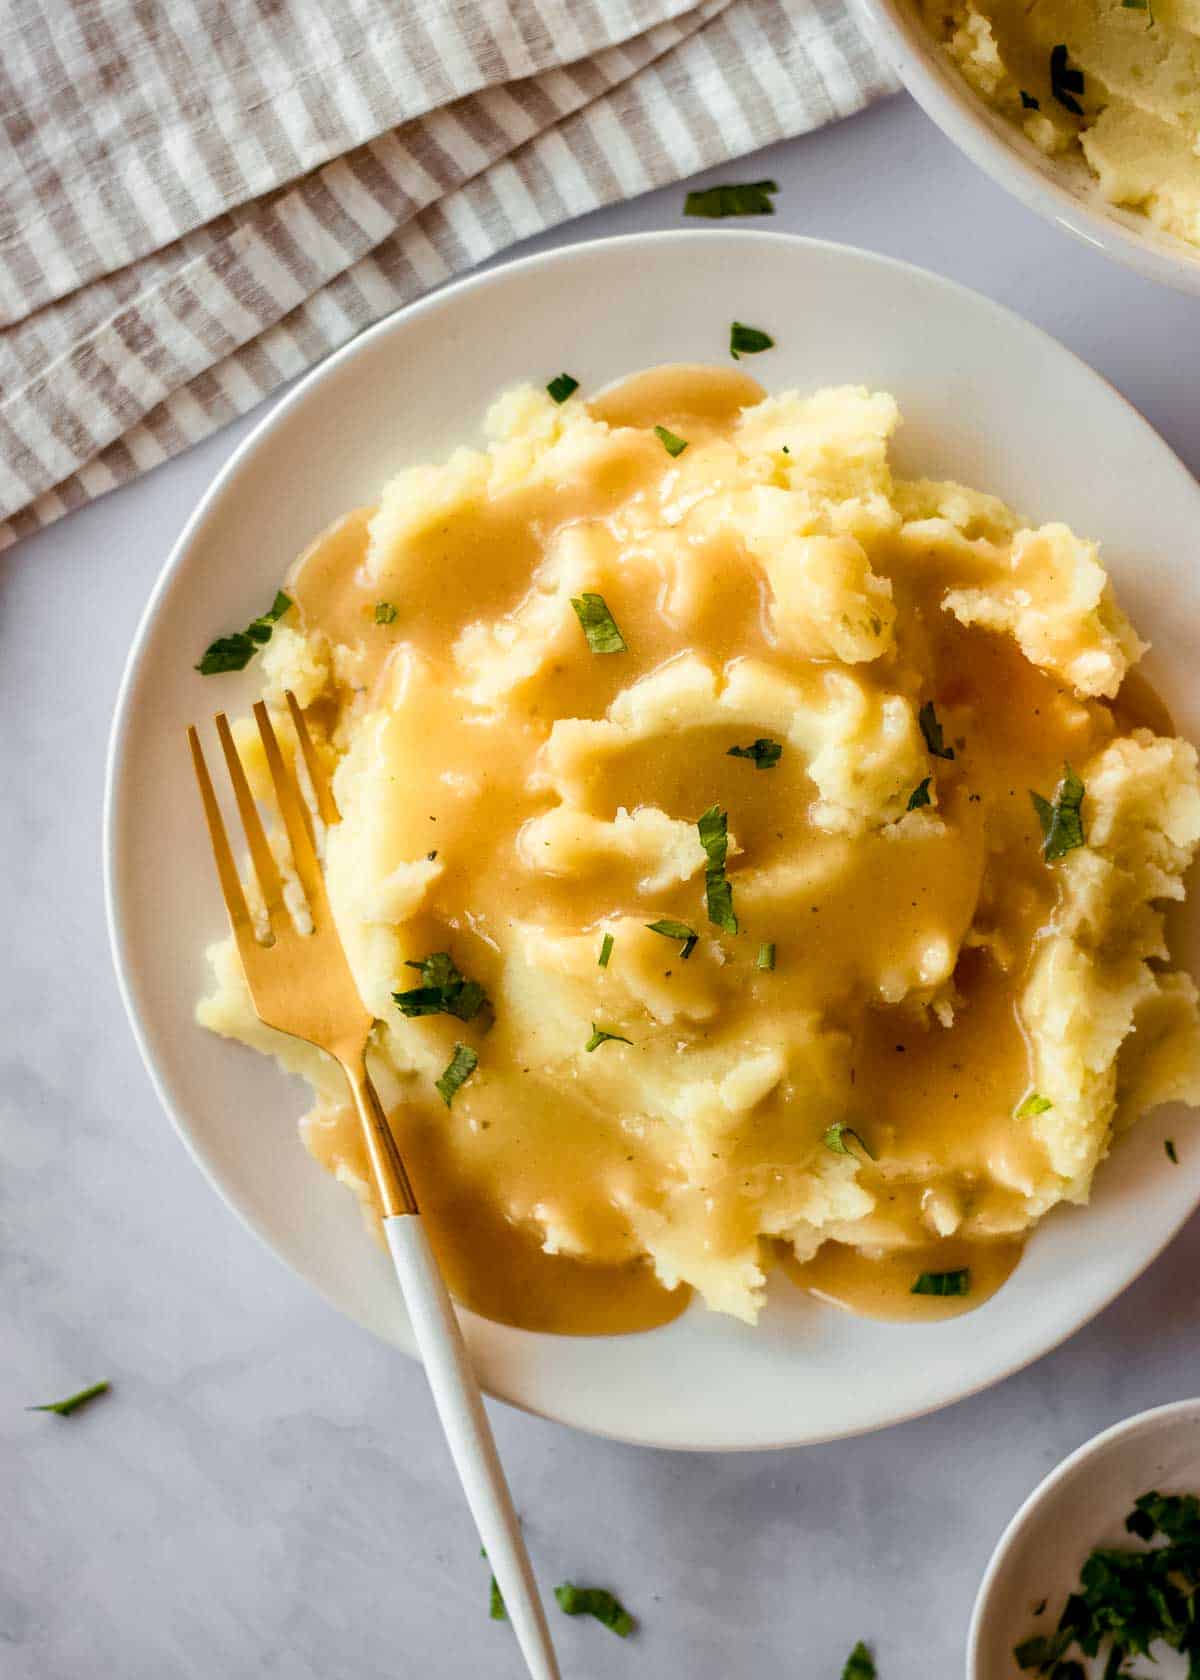 A white plate of mashed potatoes and vegan gravy sits on a white marble table. A fork is nestled in the mashed potatoes, and a dish of chopped parsley and a striped napkin are off to one side.